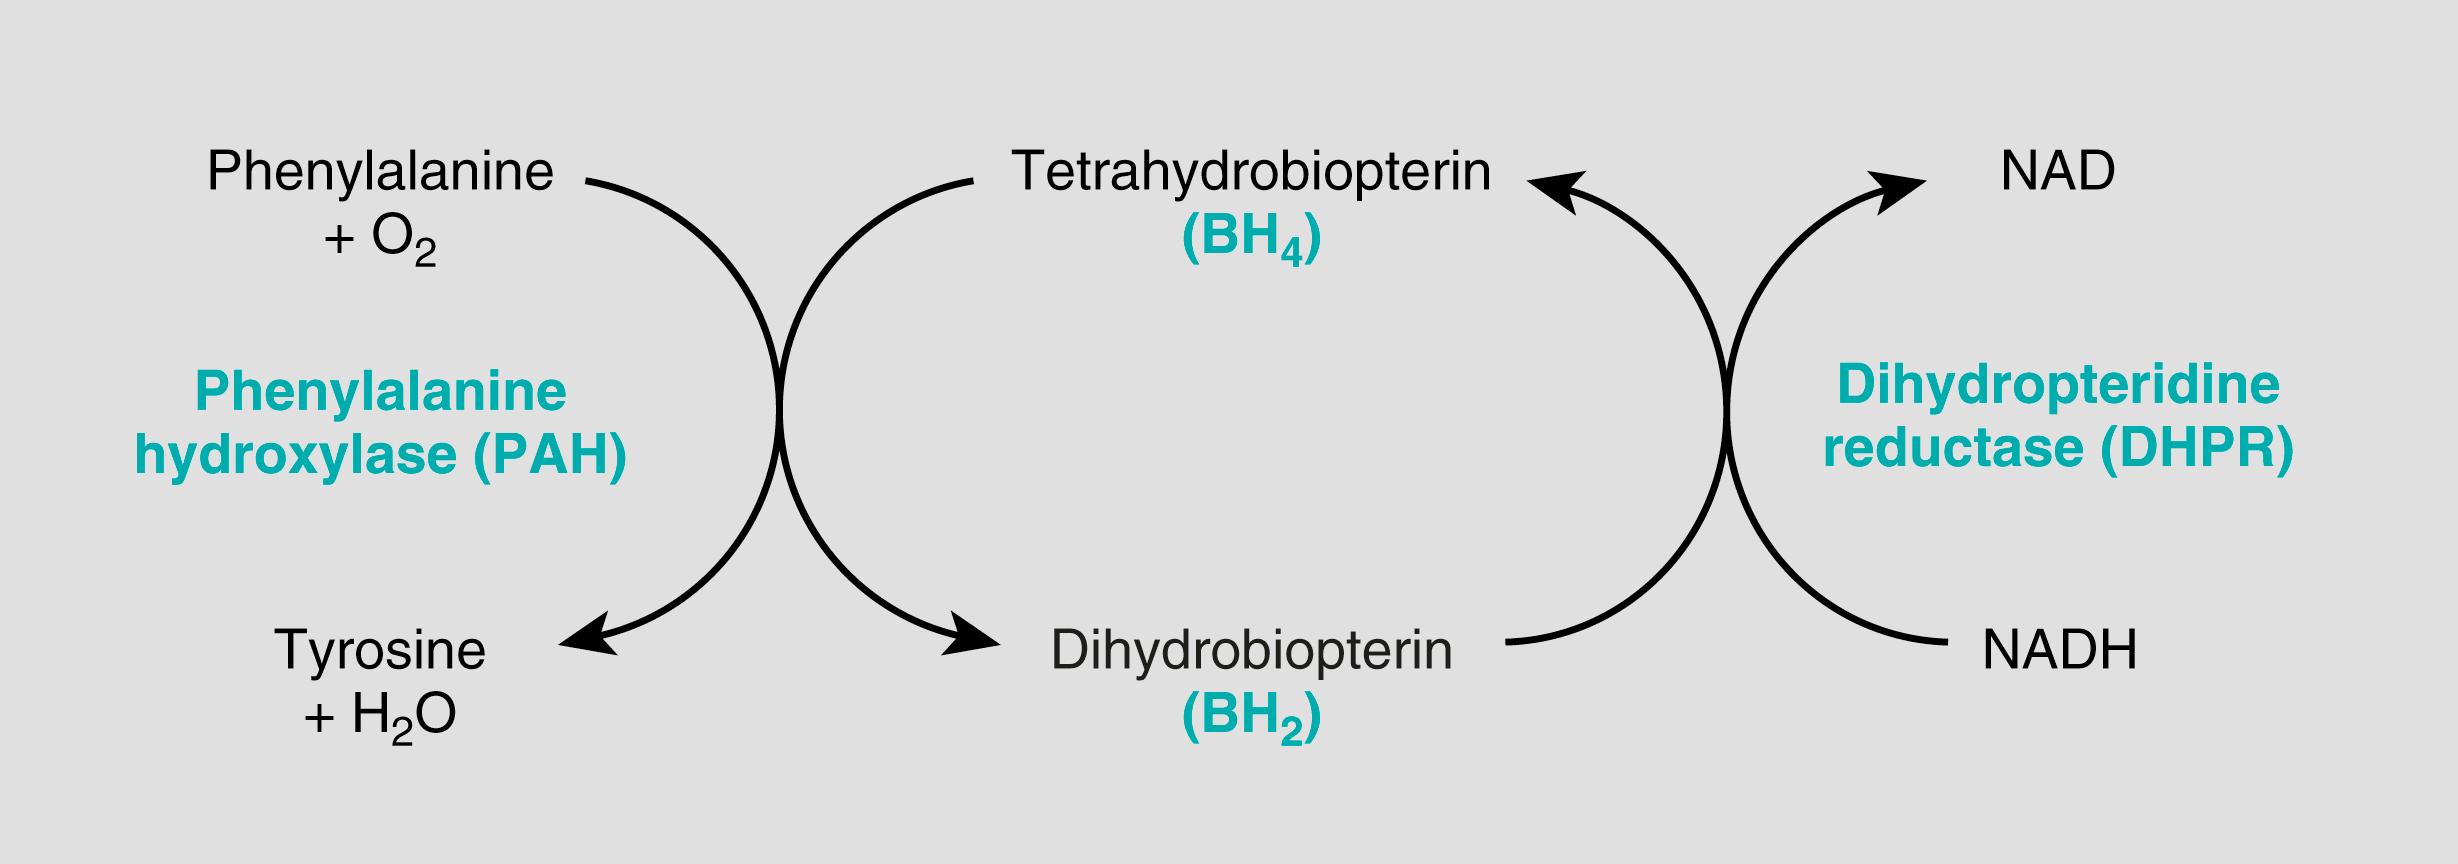 FIG. 4.11, The phenylalanine hydroxylase system. NADH, Nicotinamide adenine dinucleotide, reduced form.